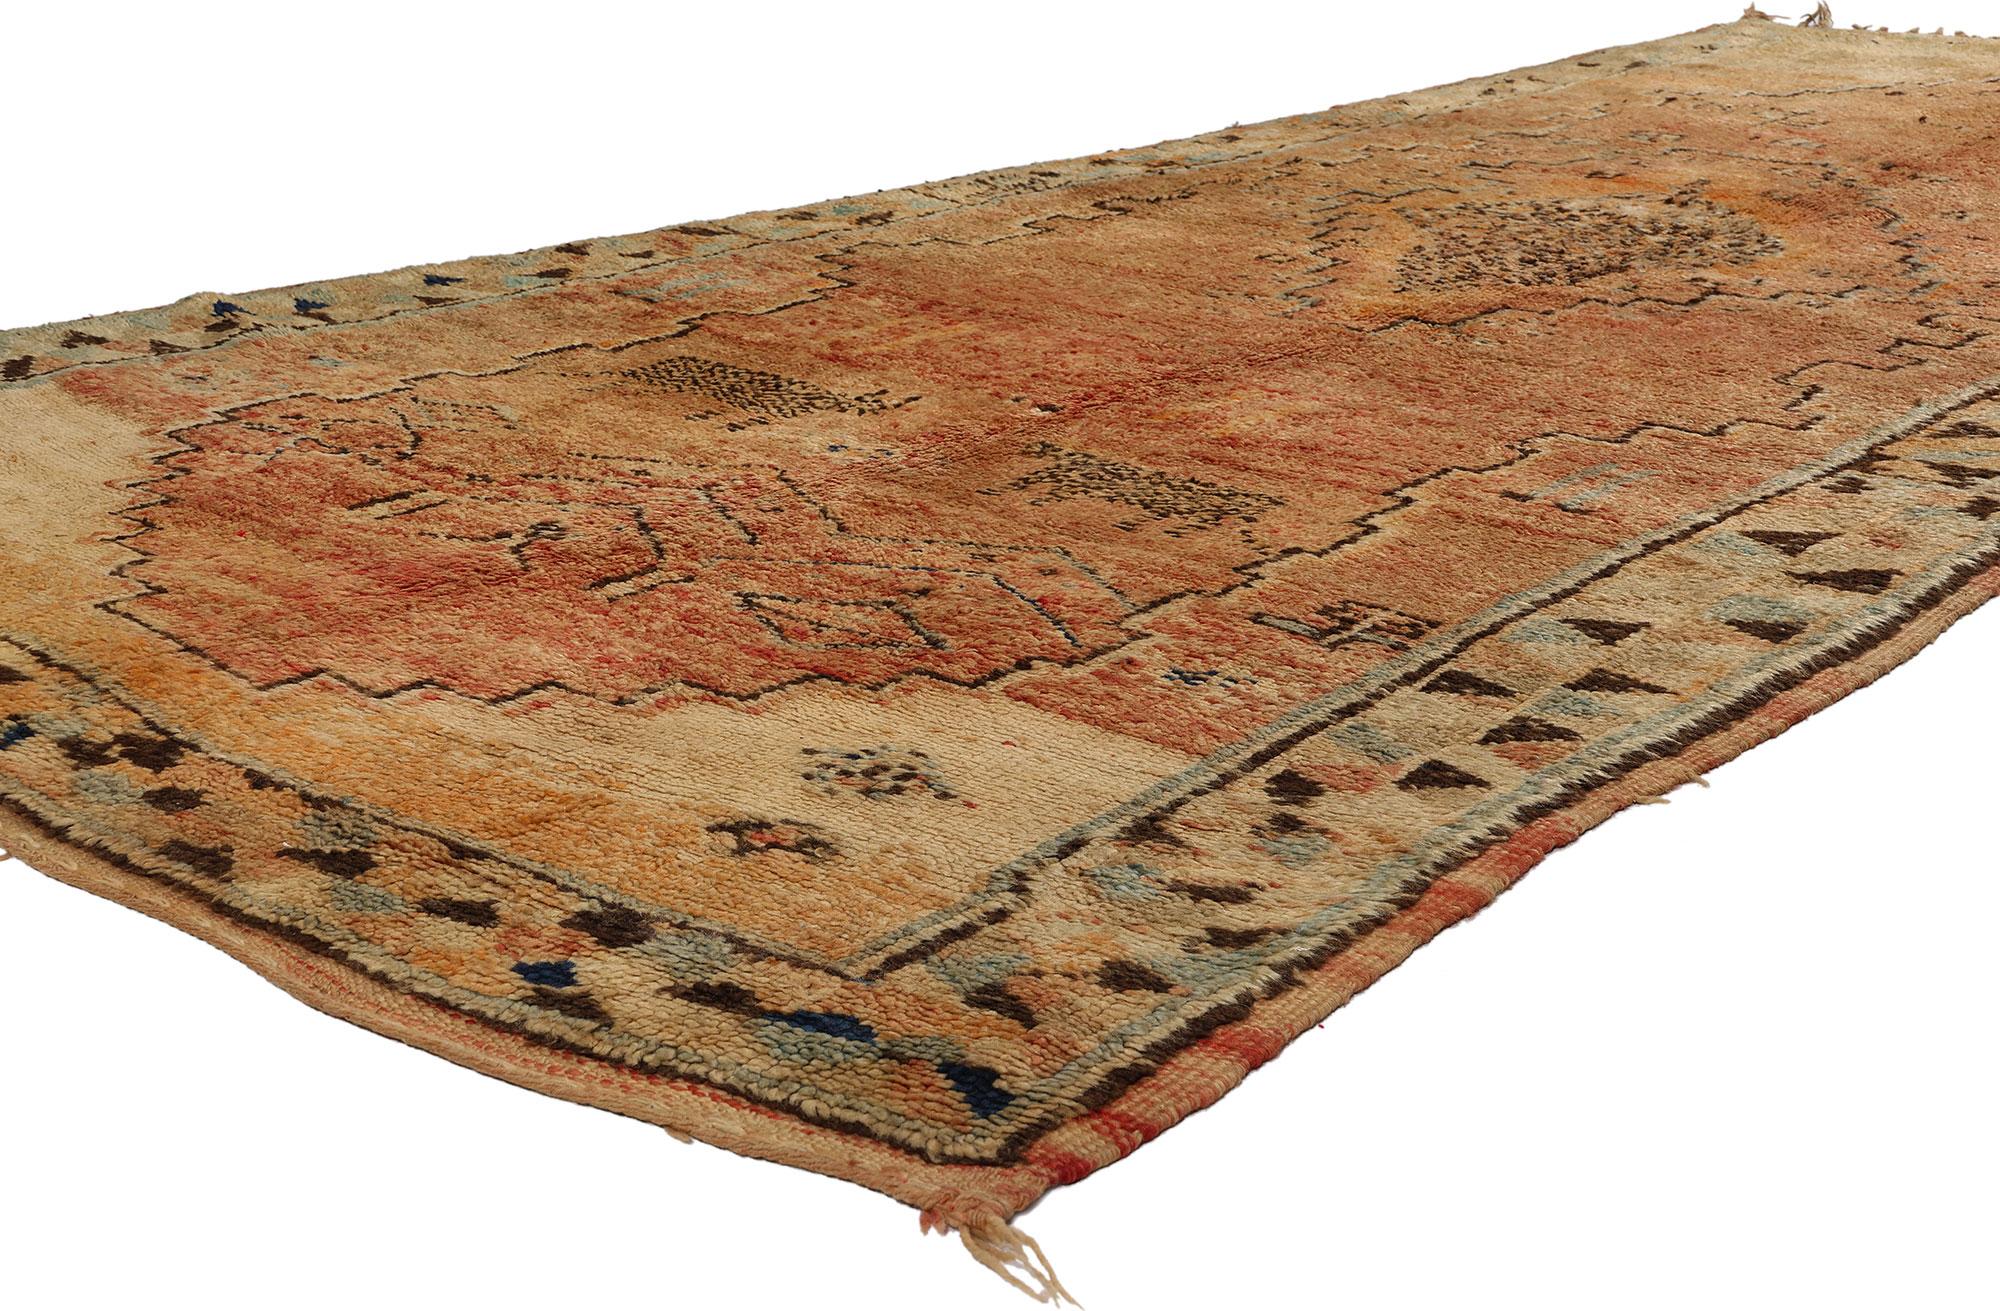 21774 Vintage Boujad Moroccan Rug, 04'10 x 10'10. Boujad rugs, the handwoven gems originating from Morocco's Boujad region, epitomize the vibrant artistry woven through generations by Berber tribes, notably the Haouz and Rehamna. These rugs are a